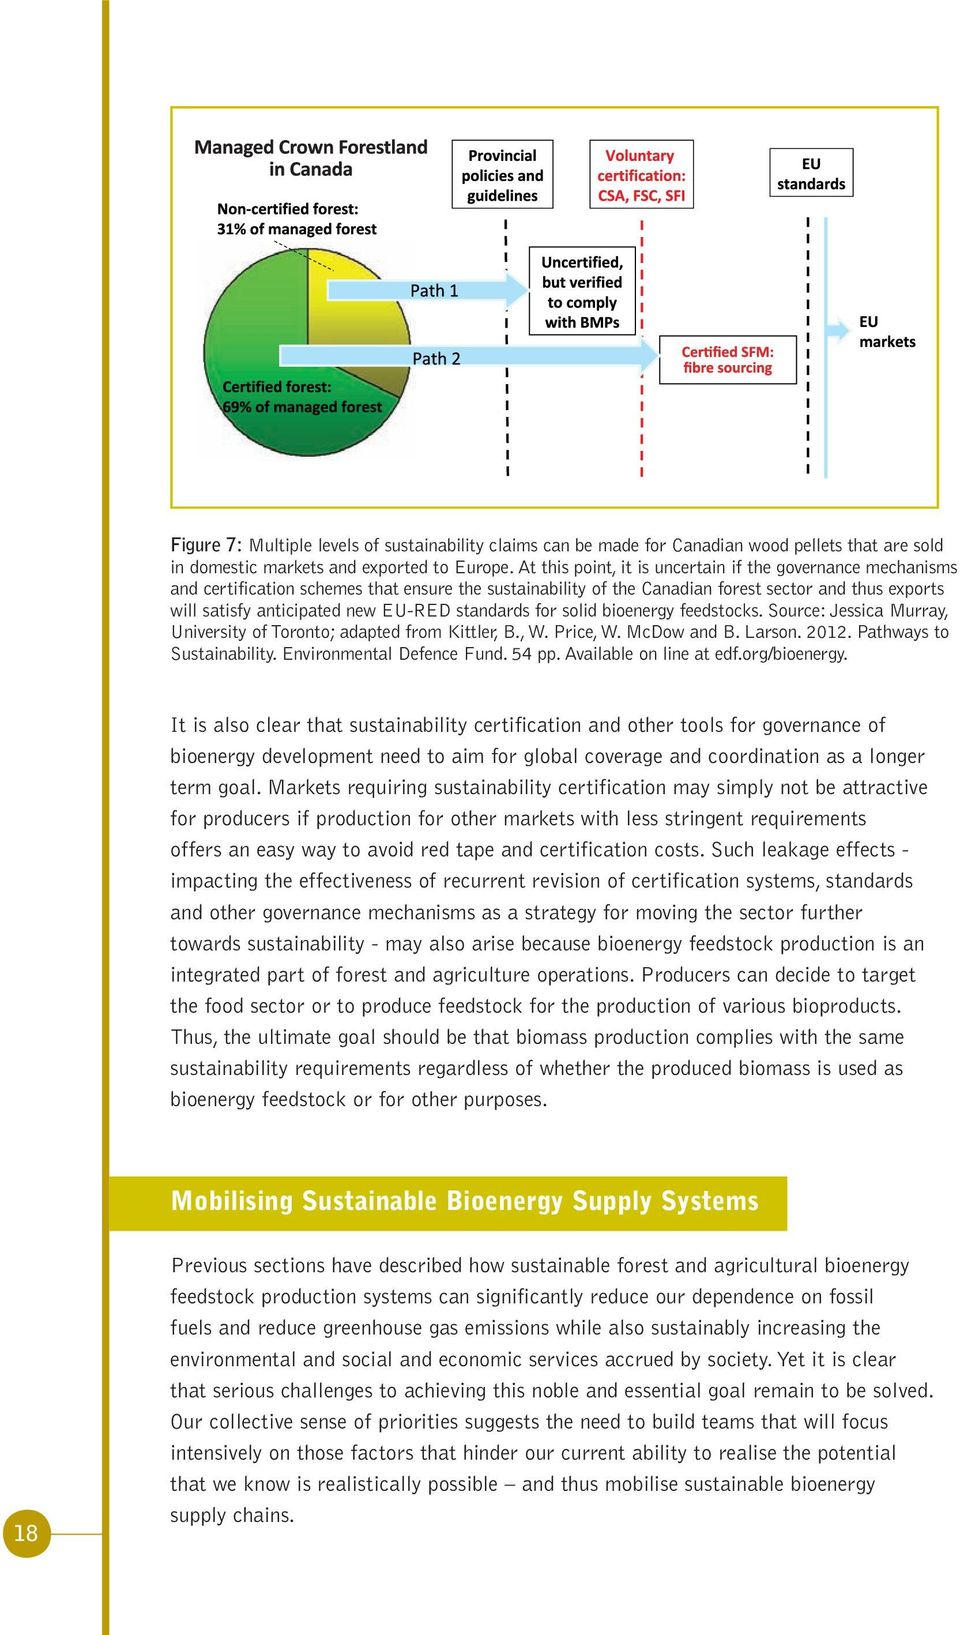 standards for solid bioenergy feedstocks. Source: Jessica Murray, University of Toronto; adapted from Kittler, B., W. Price, W. McDow and B. Larson. 2012. Pathways to Sustainability.